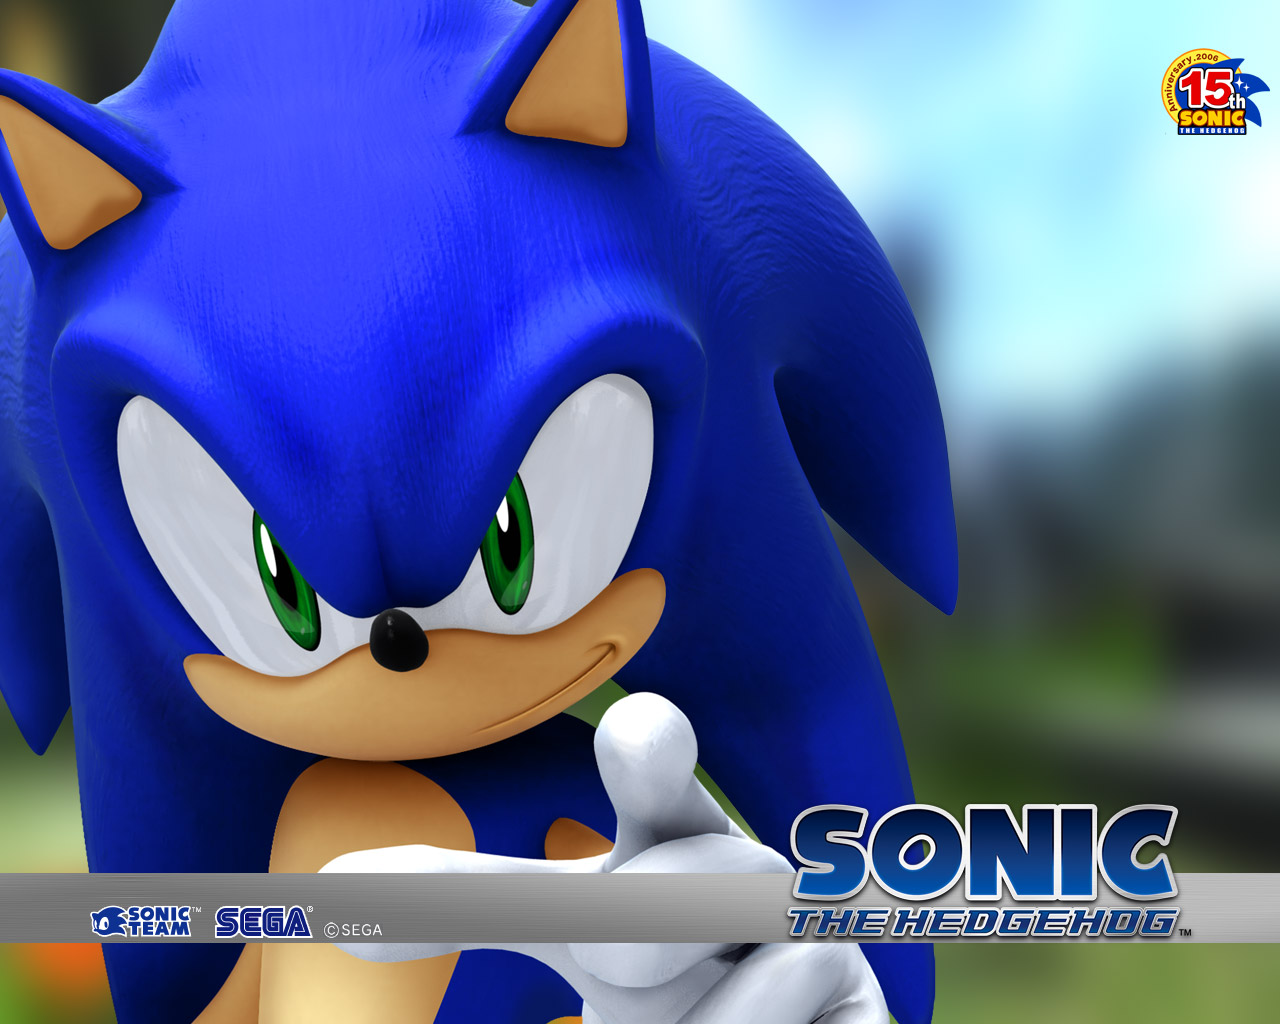 Sonic The Hedgehog 2006 Wallpapers - Wallpaper Cave